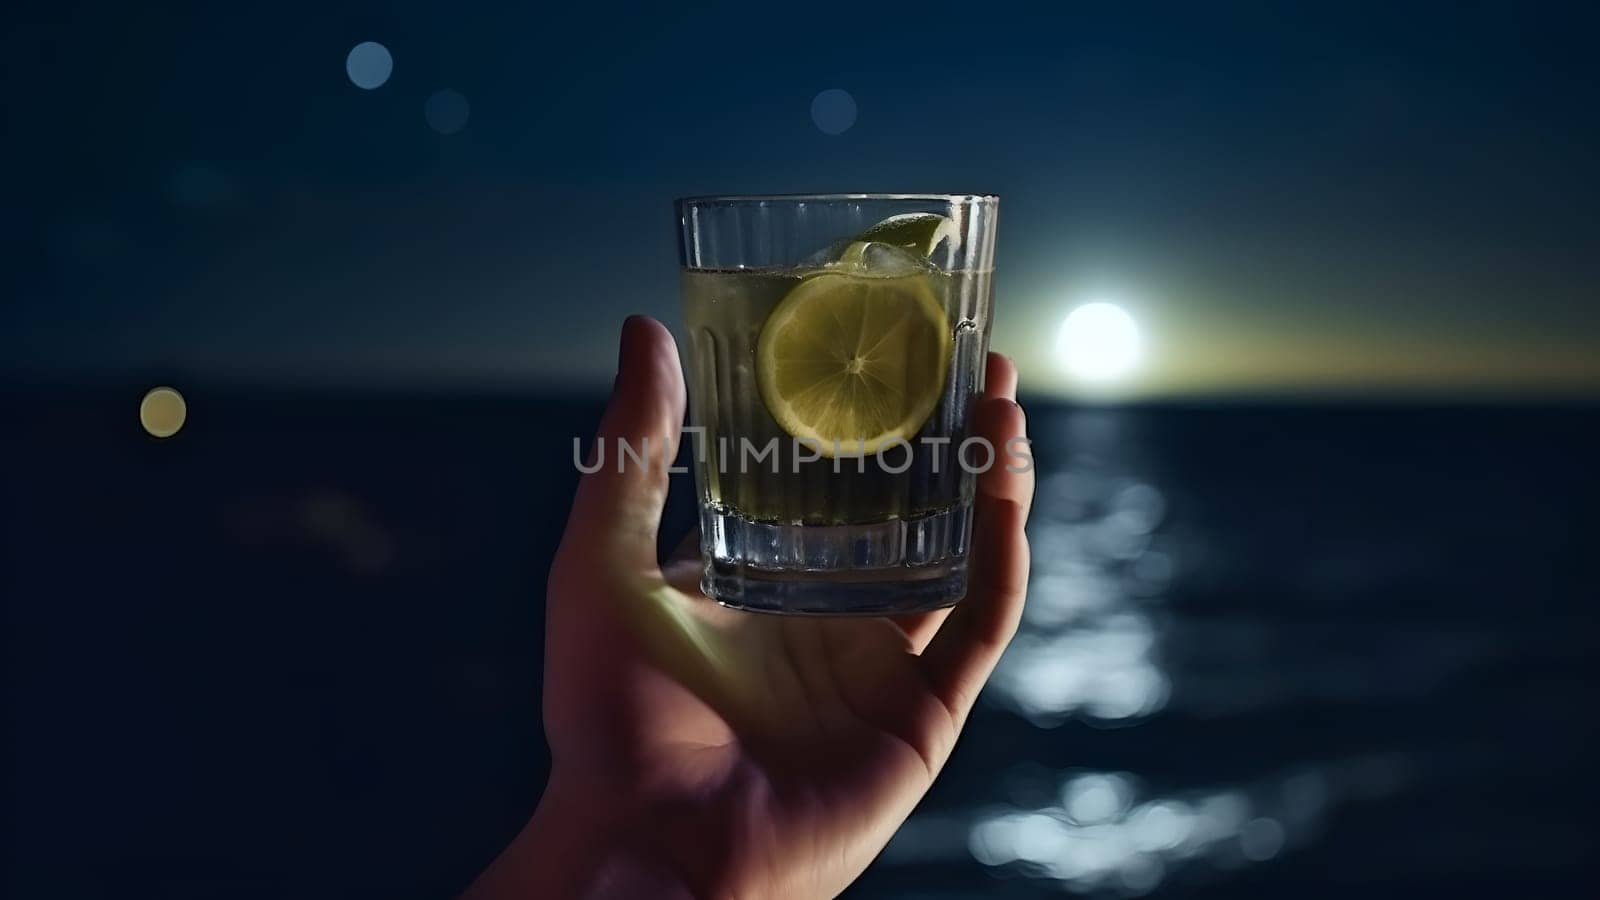 white hand holding glass of cocktail on blurry sea horizon background at full moon night, neural network generated image by z1b